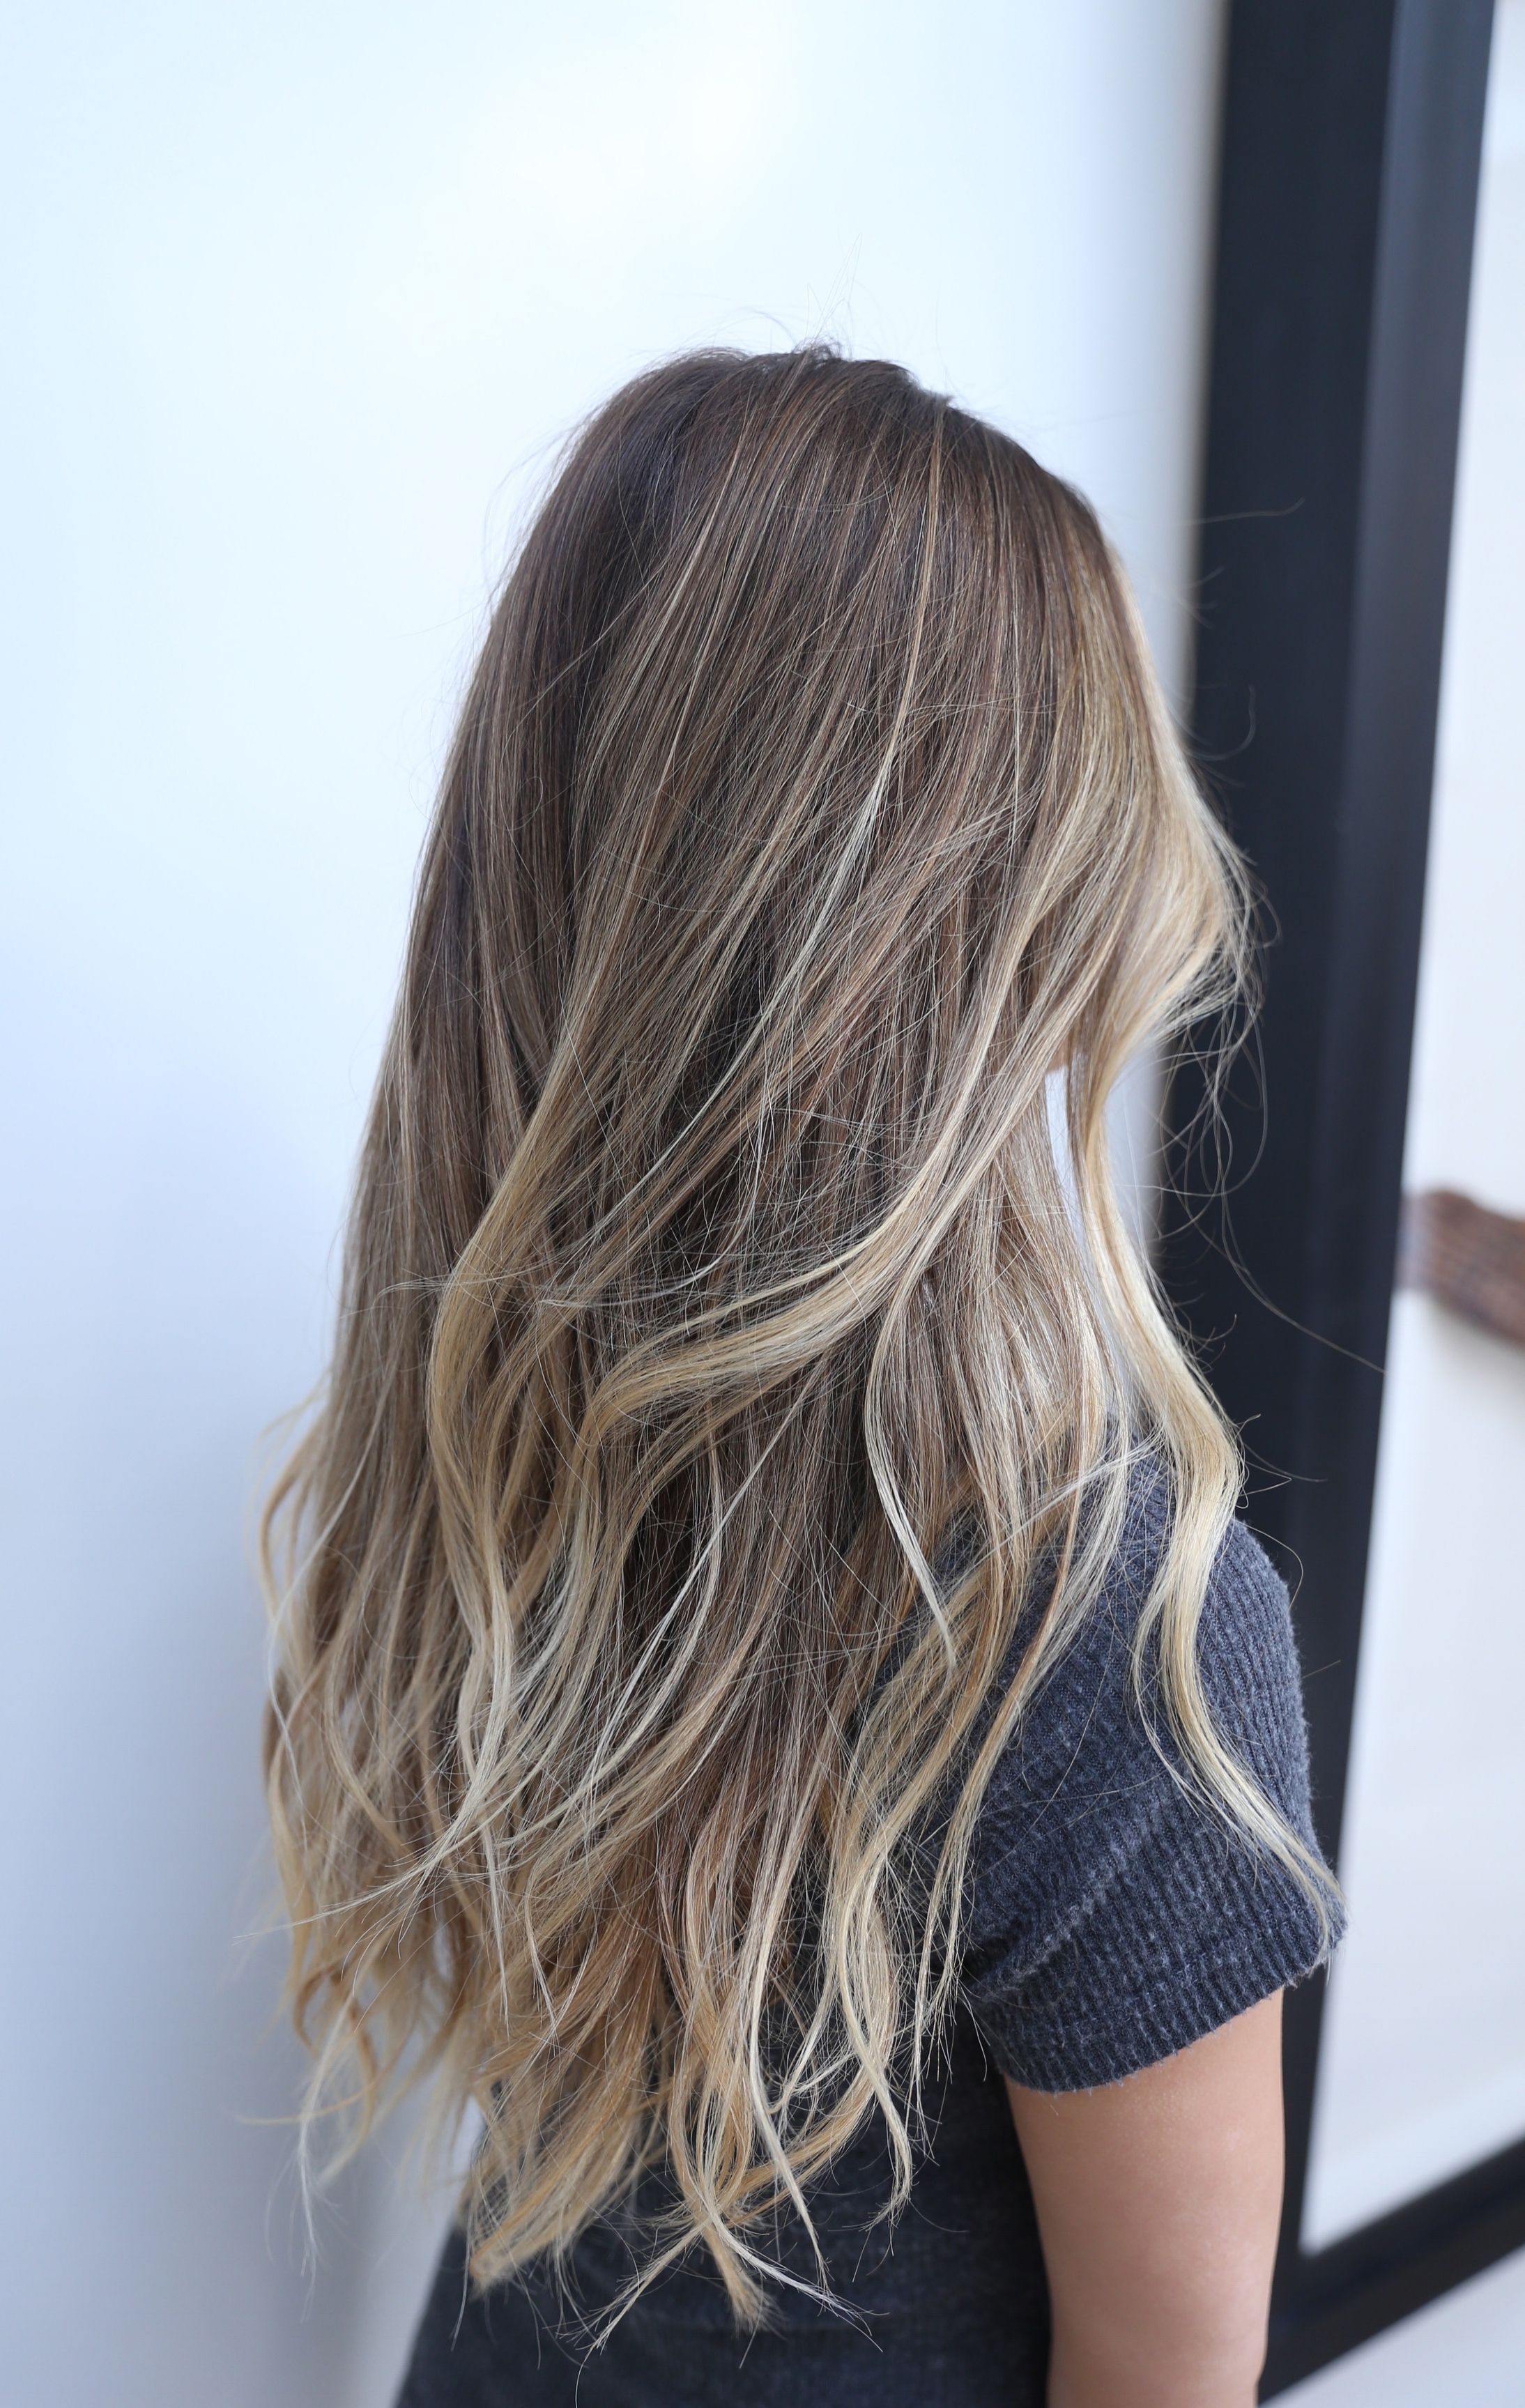 Current Beachy Waves With Ombre Intended For Beachy Ombre Highlight — Stephen Garrison (Gallery 3 of 18)